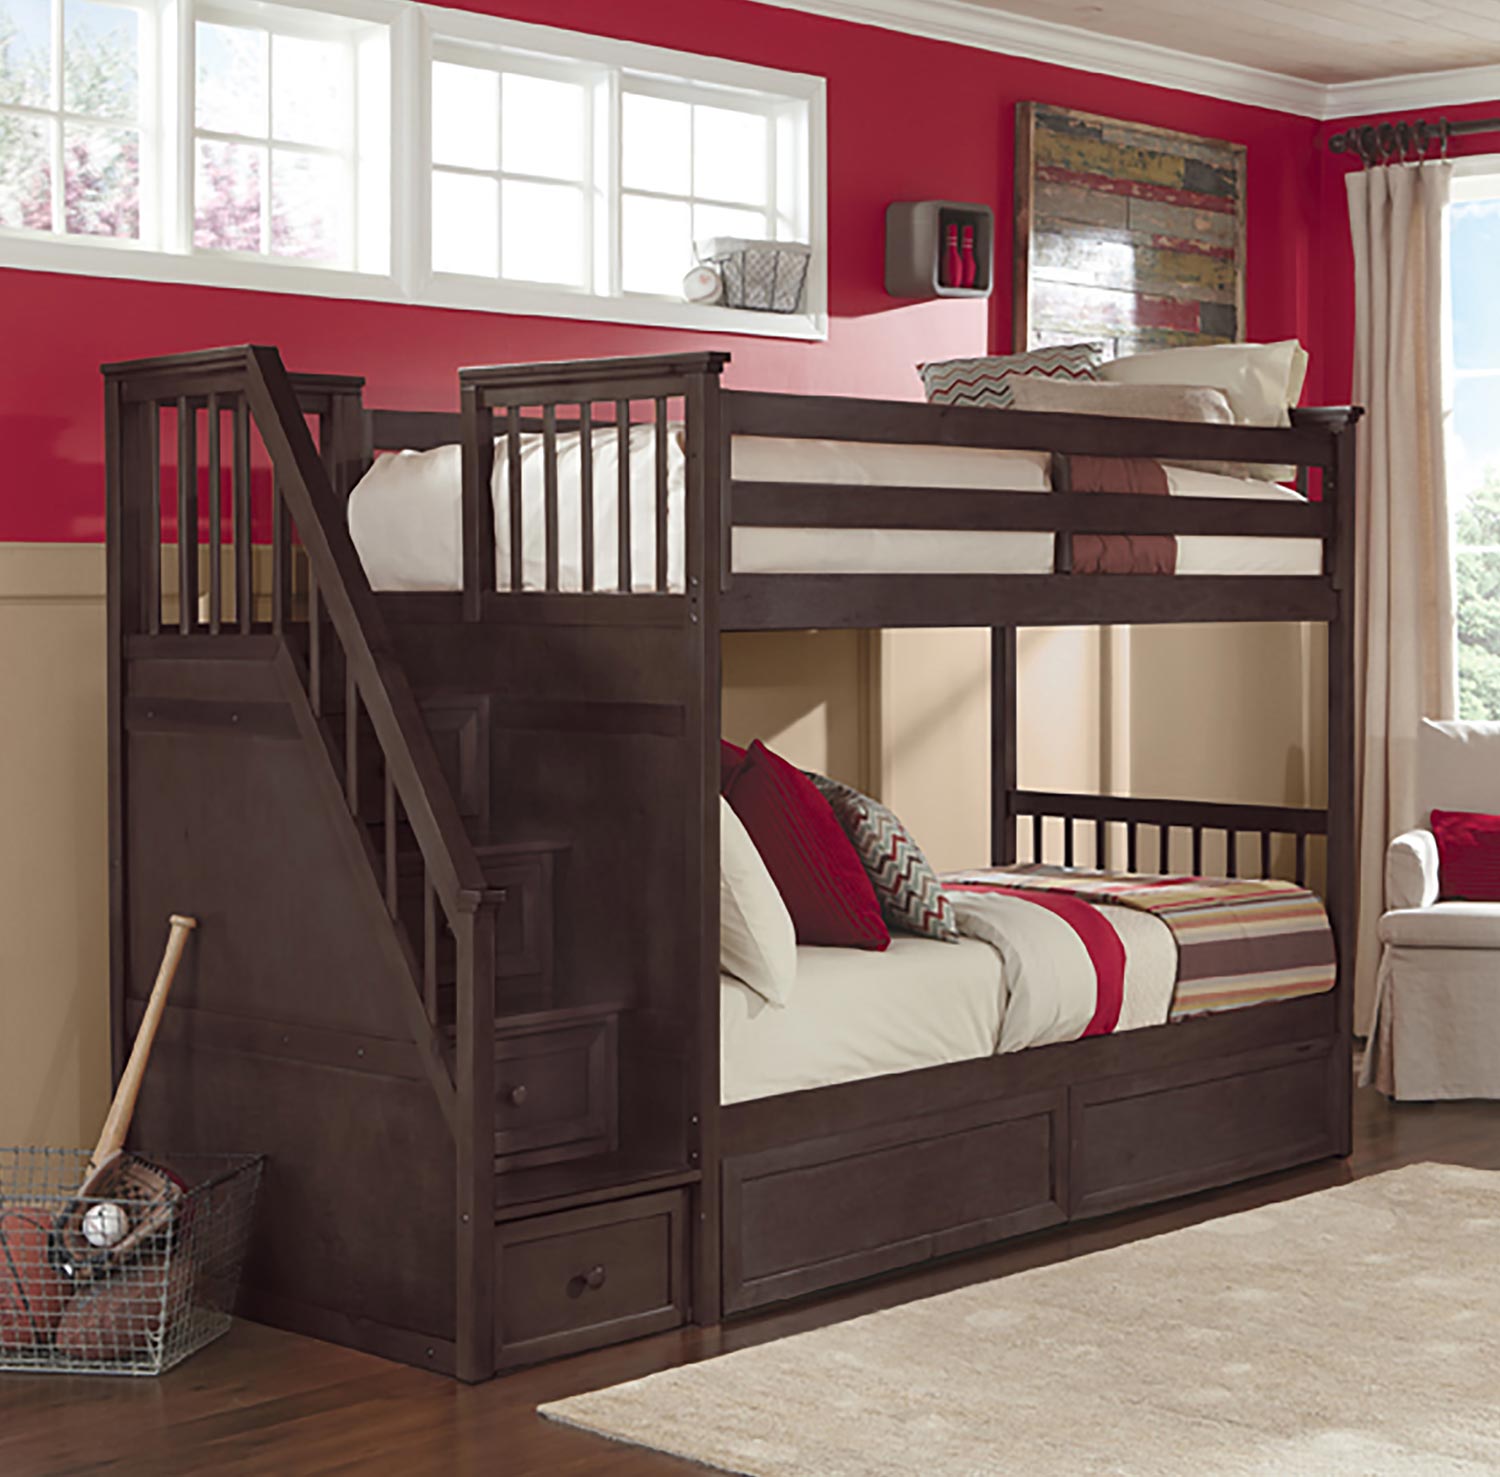 NE Kids SchoolHouse Stair Bunk Bed with Storage - Chocolate Finish